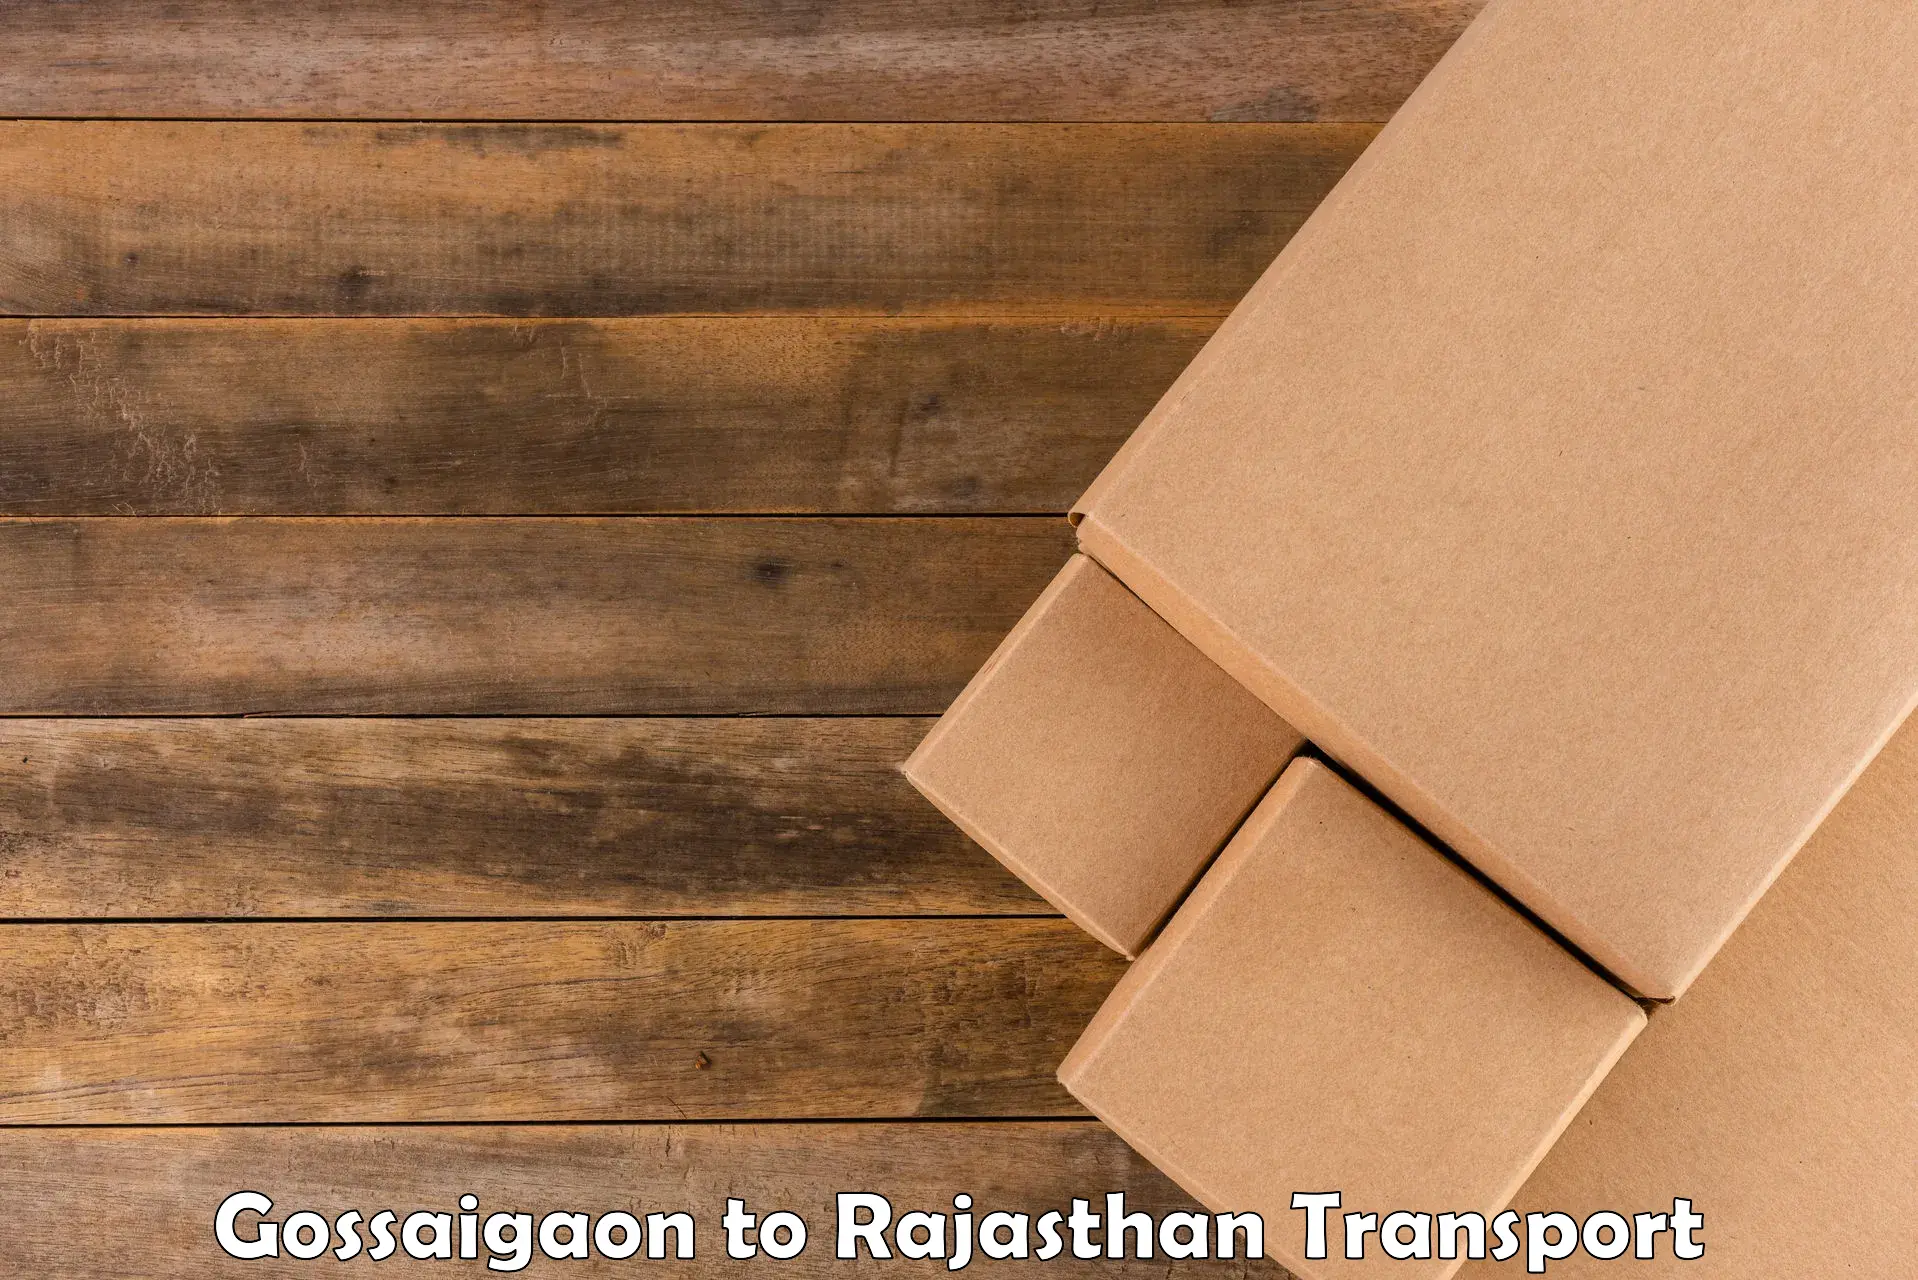 Daily parcel service transport Gossaigaon to Dausa